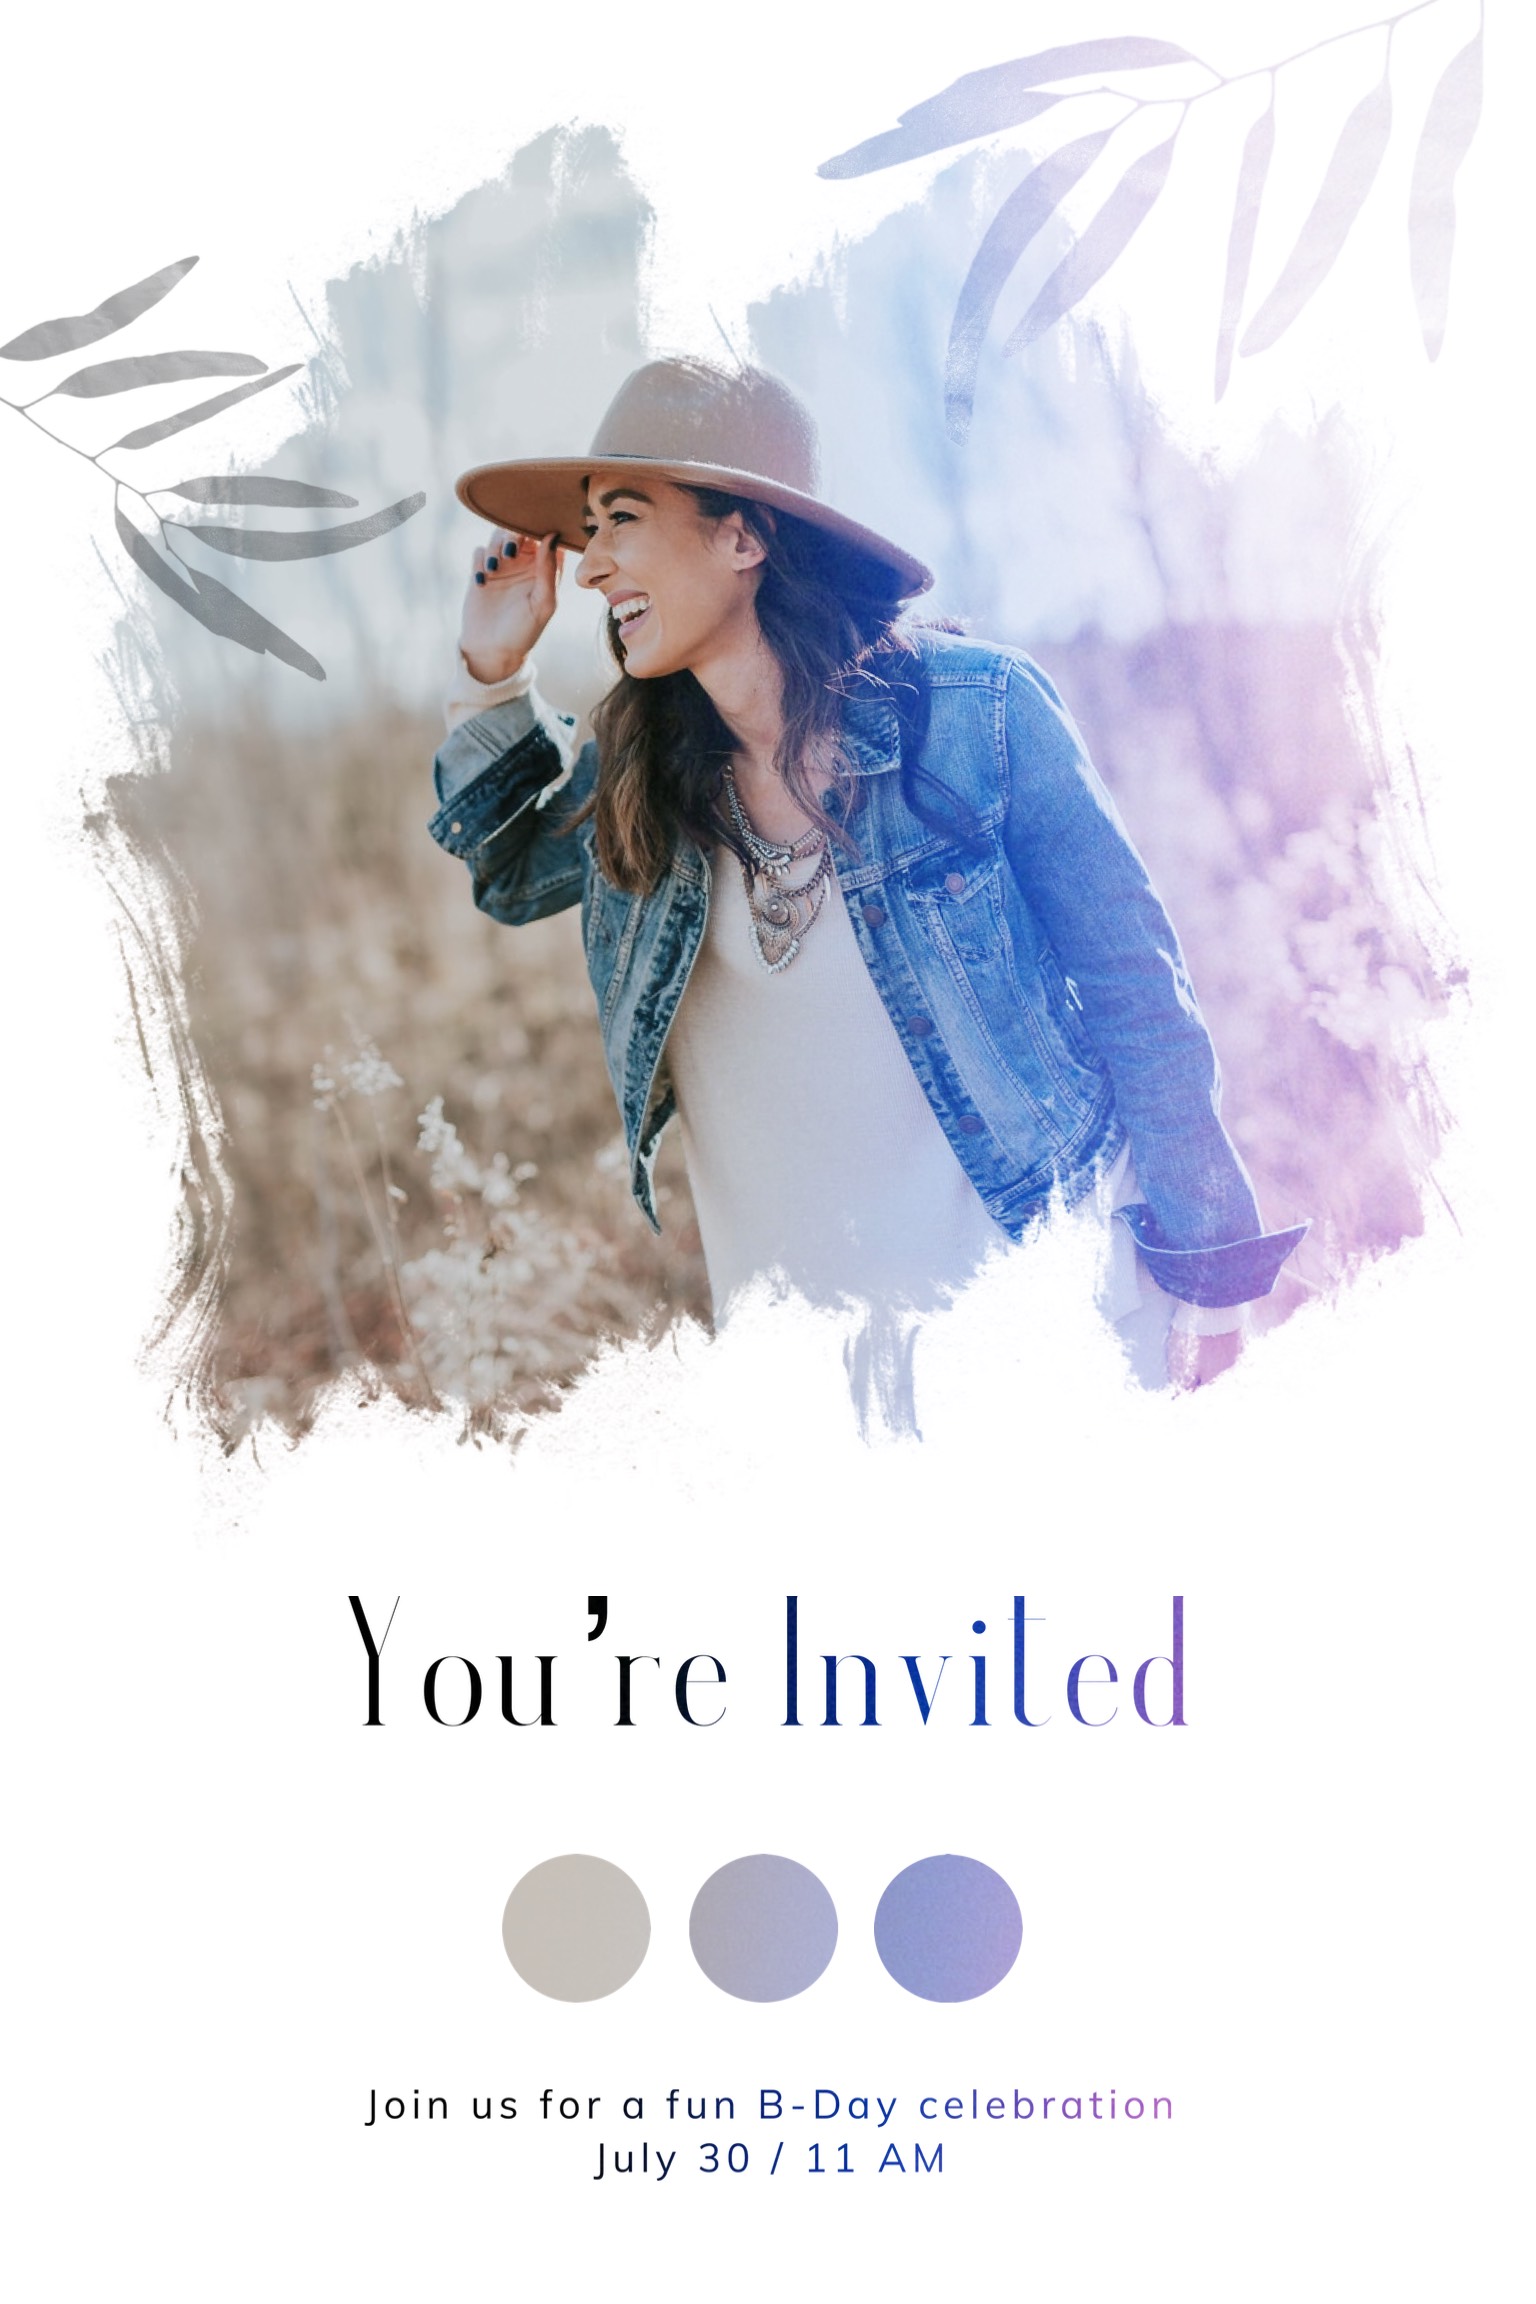 A Photo Of A Woman Wearing A Hat And Denim Jacket Invitation Template